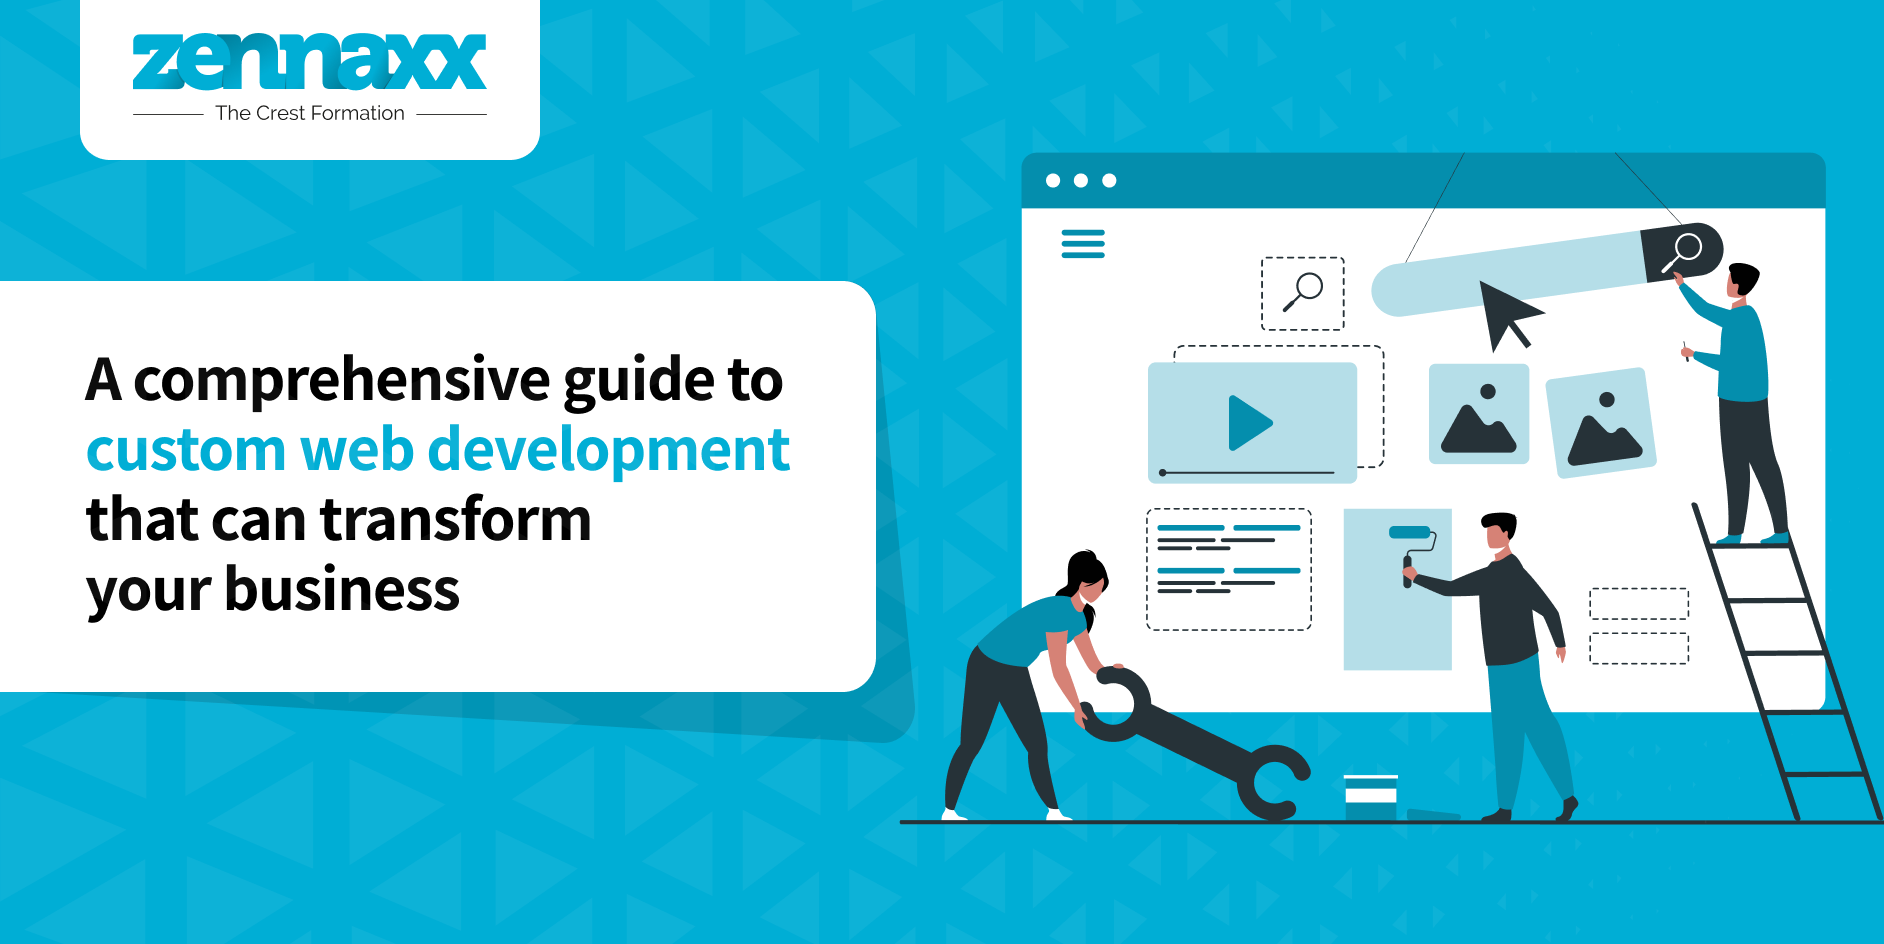 A comprehensive guide to custom web development that can transform your business